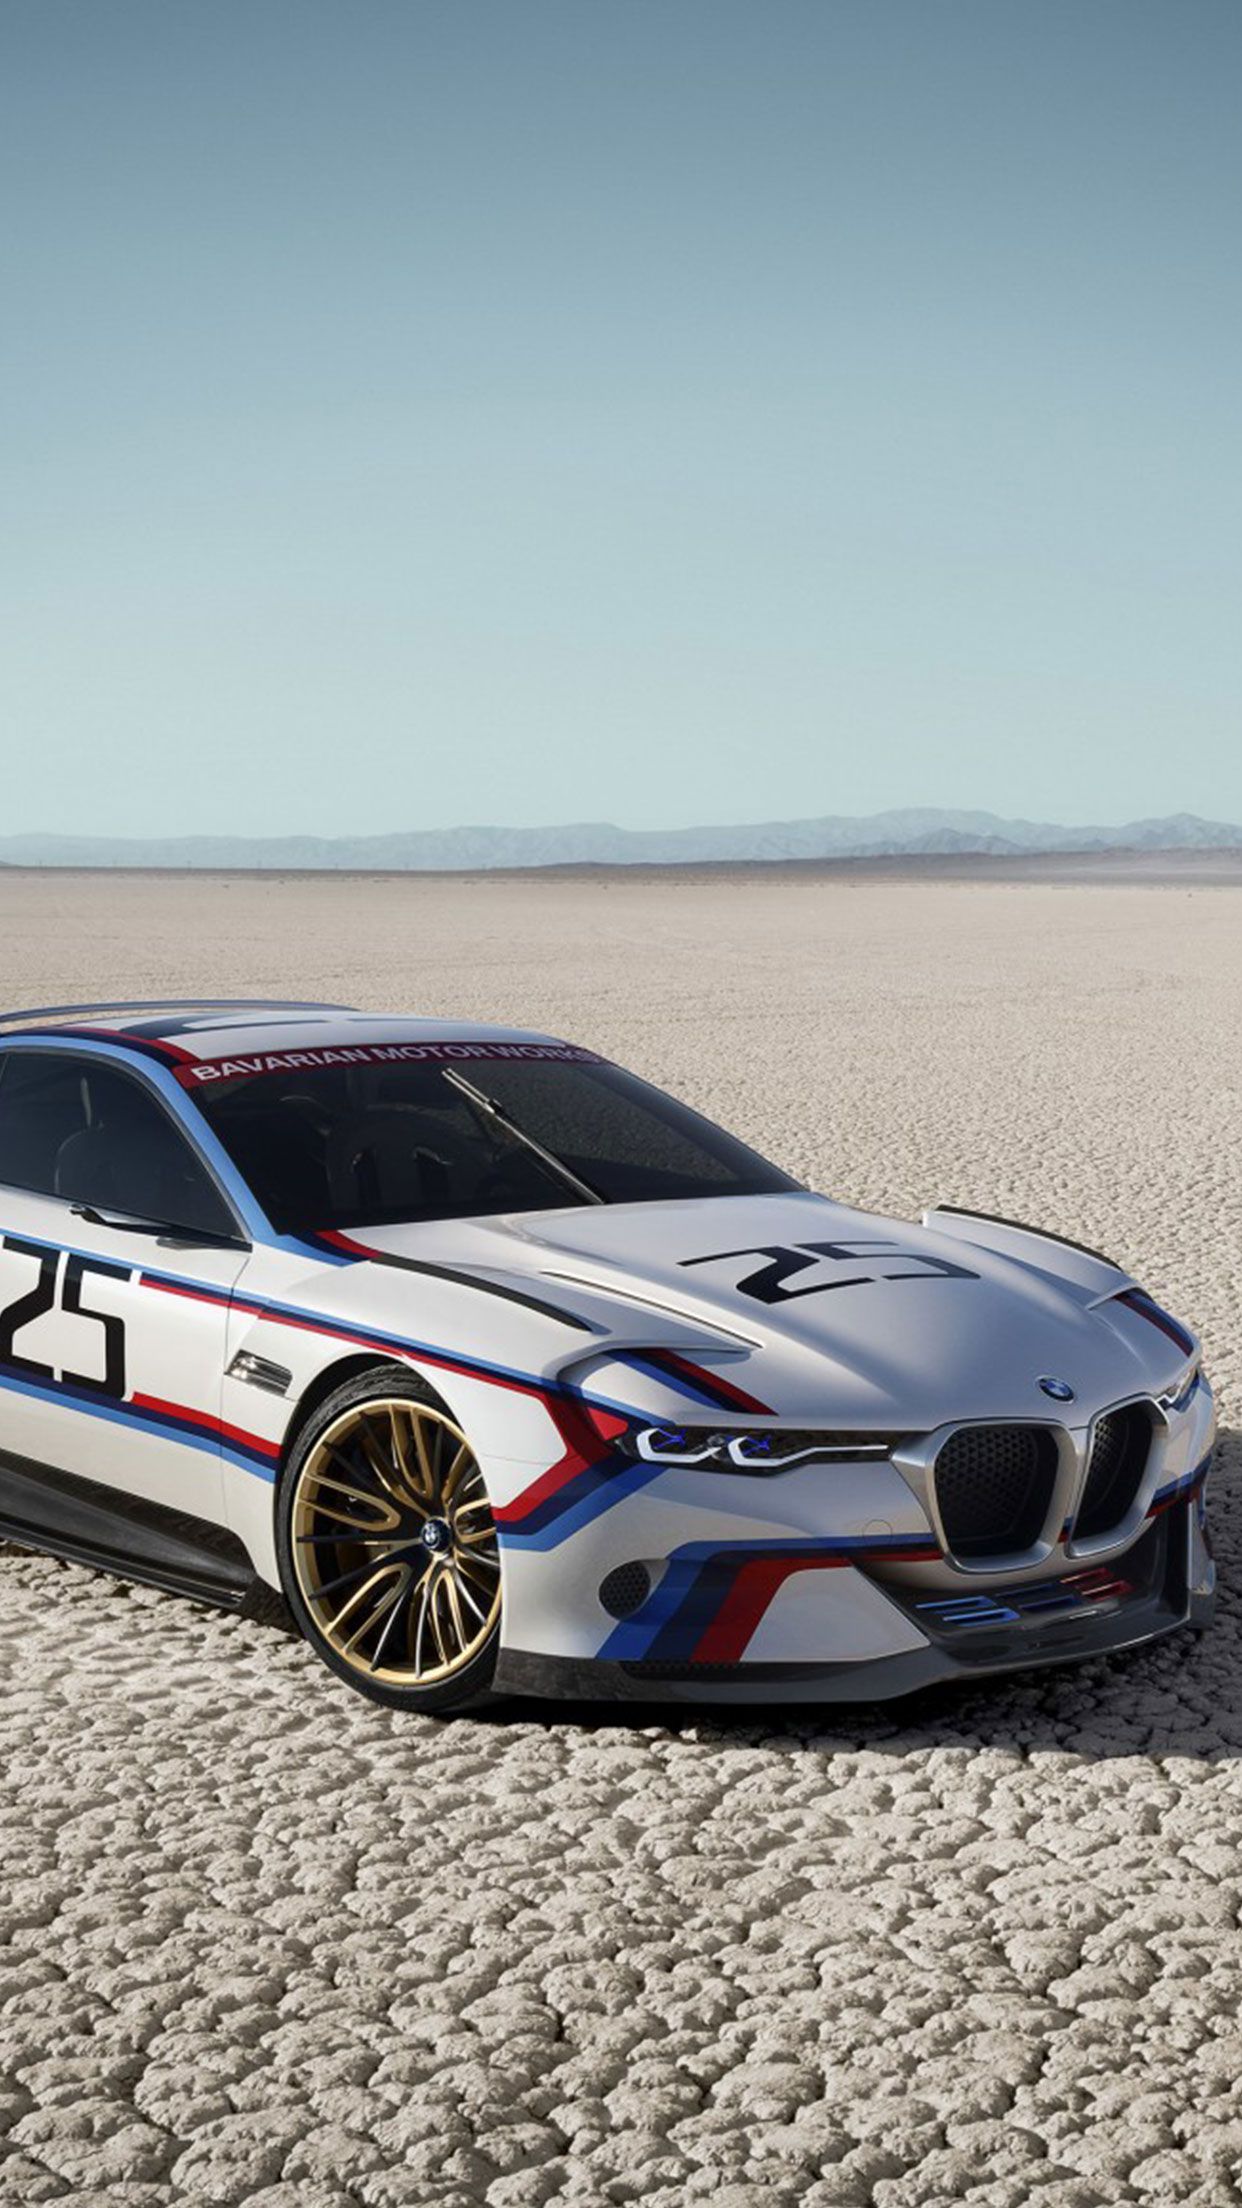 Bmw Csl Car Wallpaper iPhone Android More Like